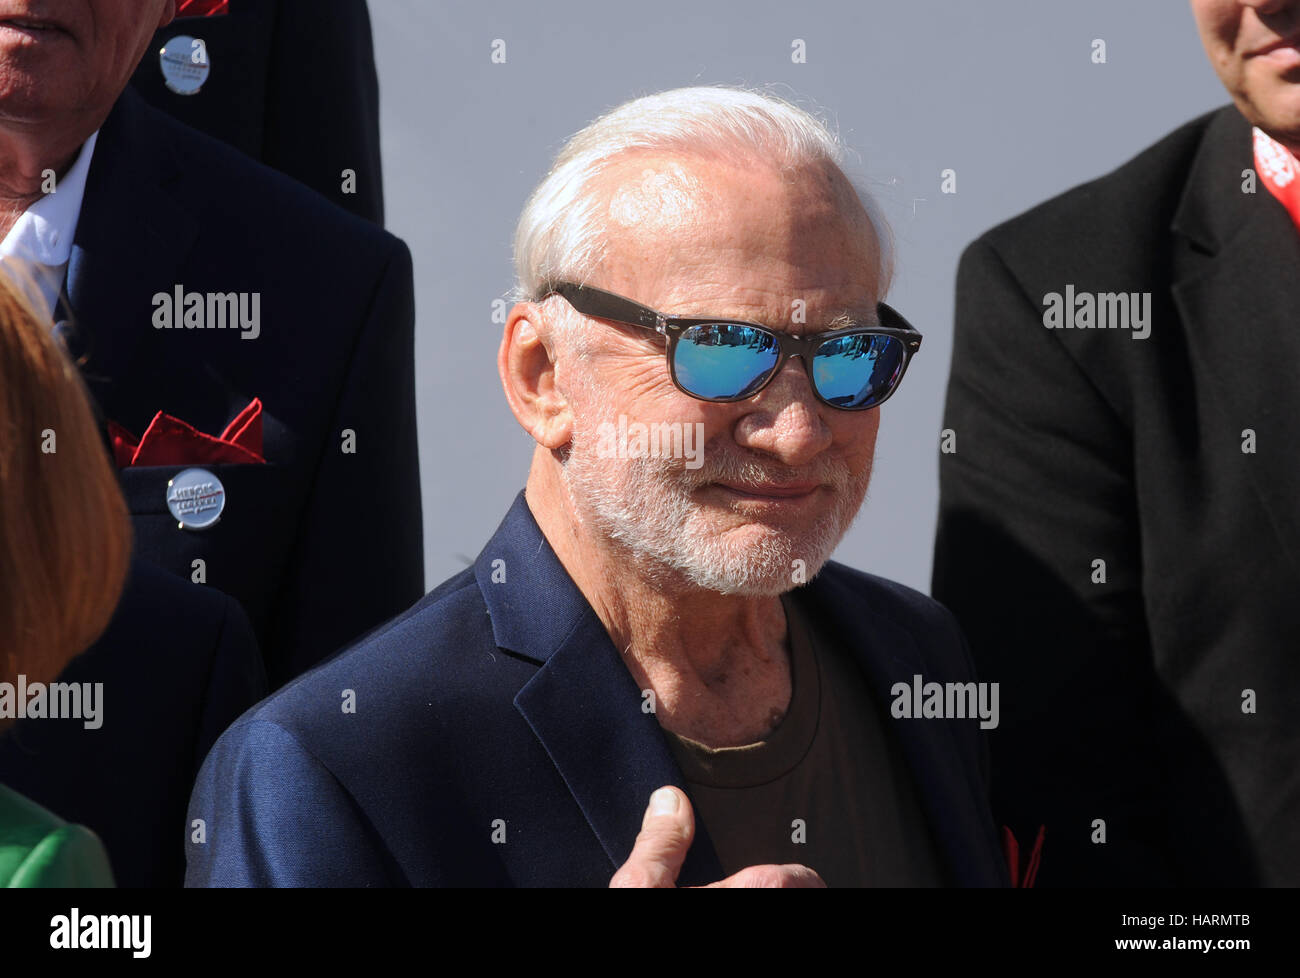 November 11, 2016 - Titusville, Florida, United States - Former astronaut Buzz Aldrin, the second person to walk on the moon in 1969,  participates in Stock Photo